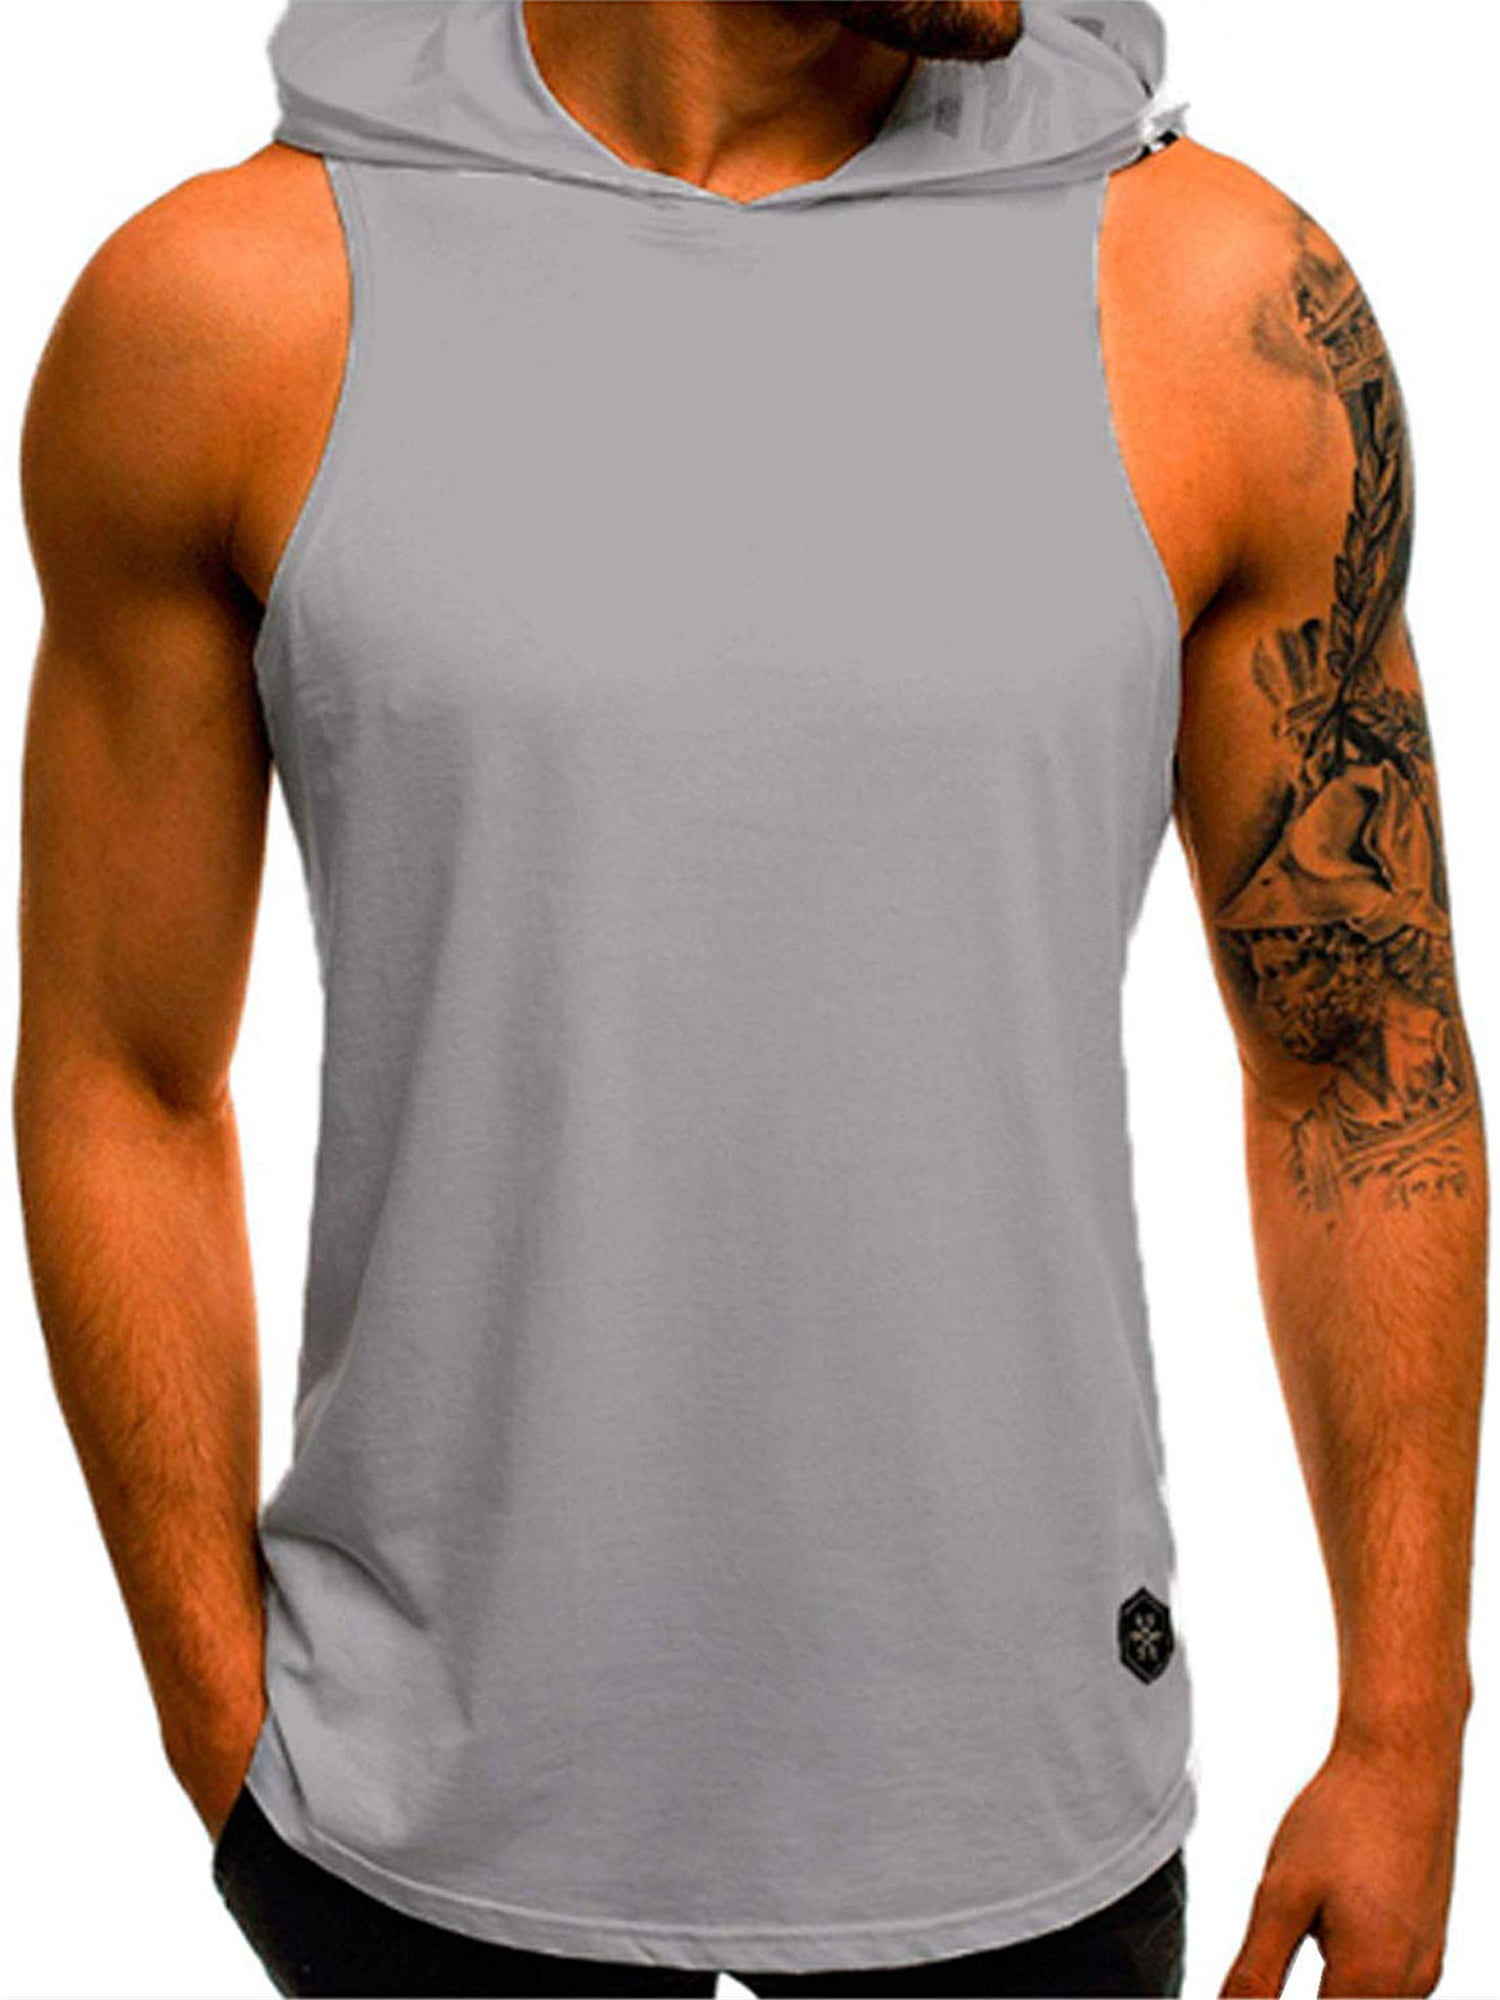 ZSBAYU Mens Workout Hooded Tank Tops Bodybuilding Muscle Cut Off T Shirt Sleeveless Gym Hoodies Athletic Workout Fitness Vest 